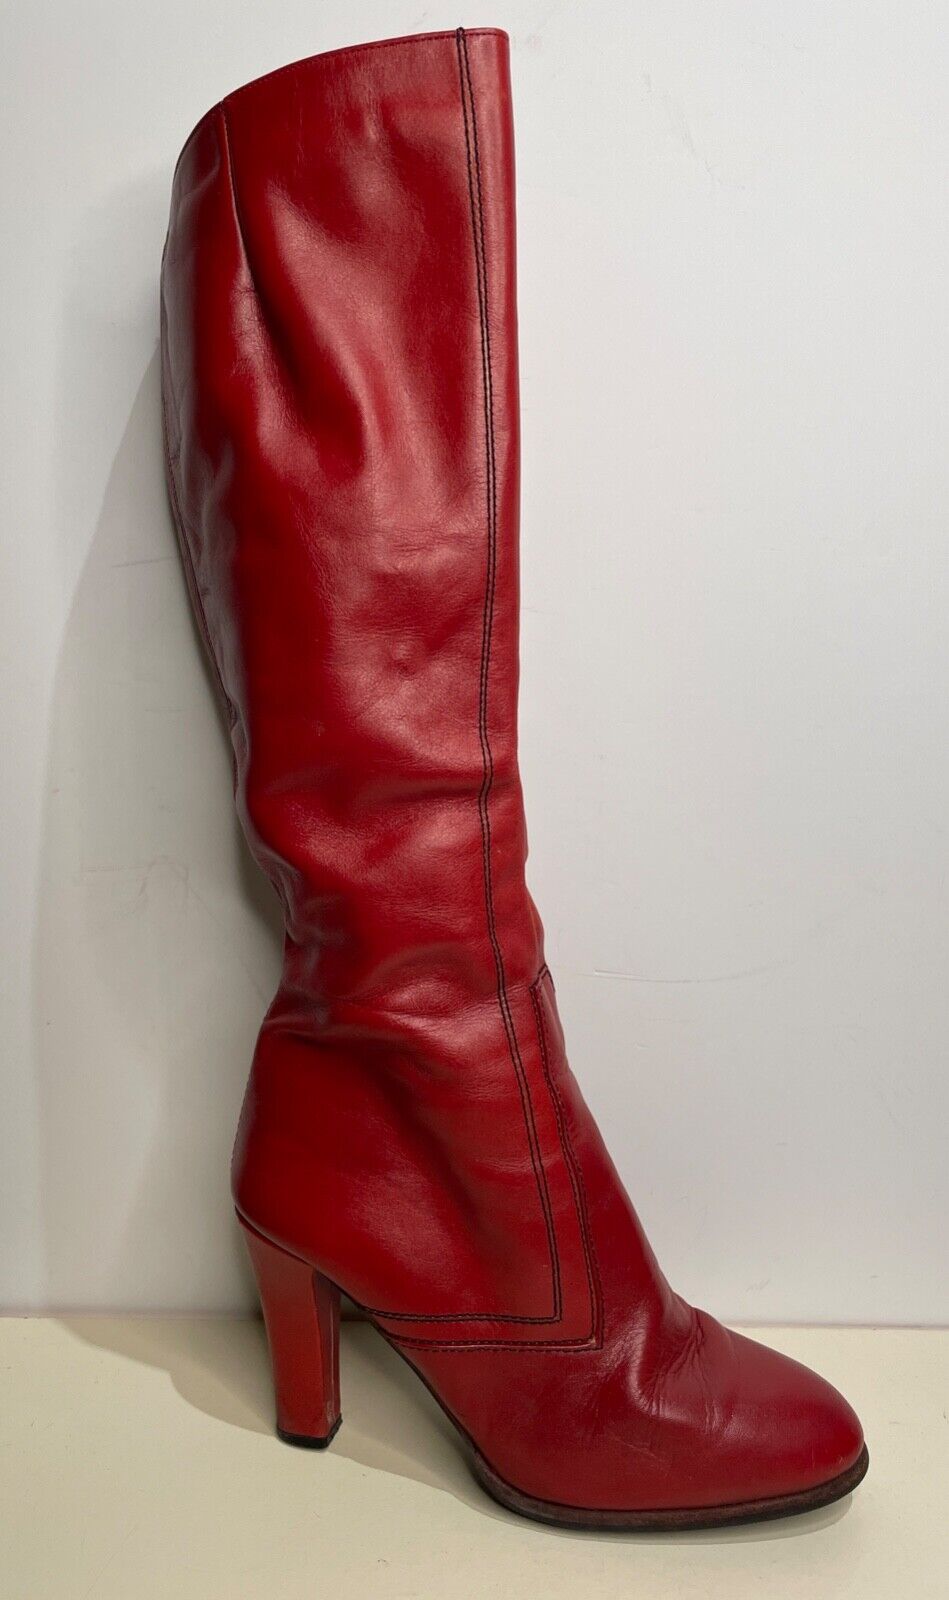 Vtg 60's-70's Lujano Red Leather Knee High Zip High Heel Gogo Boots*8